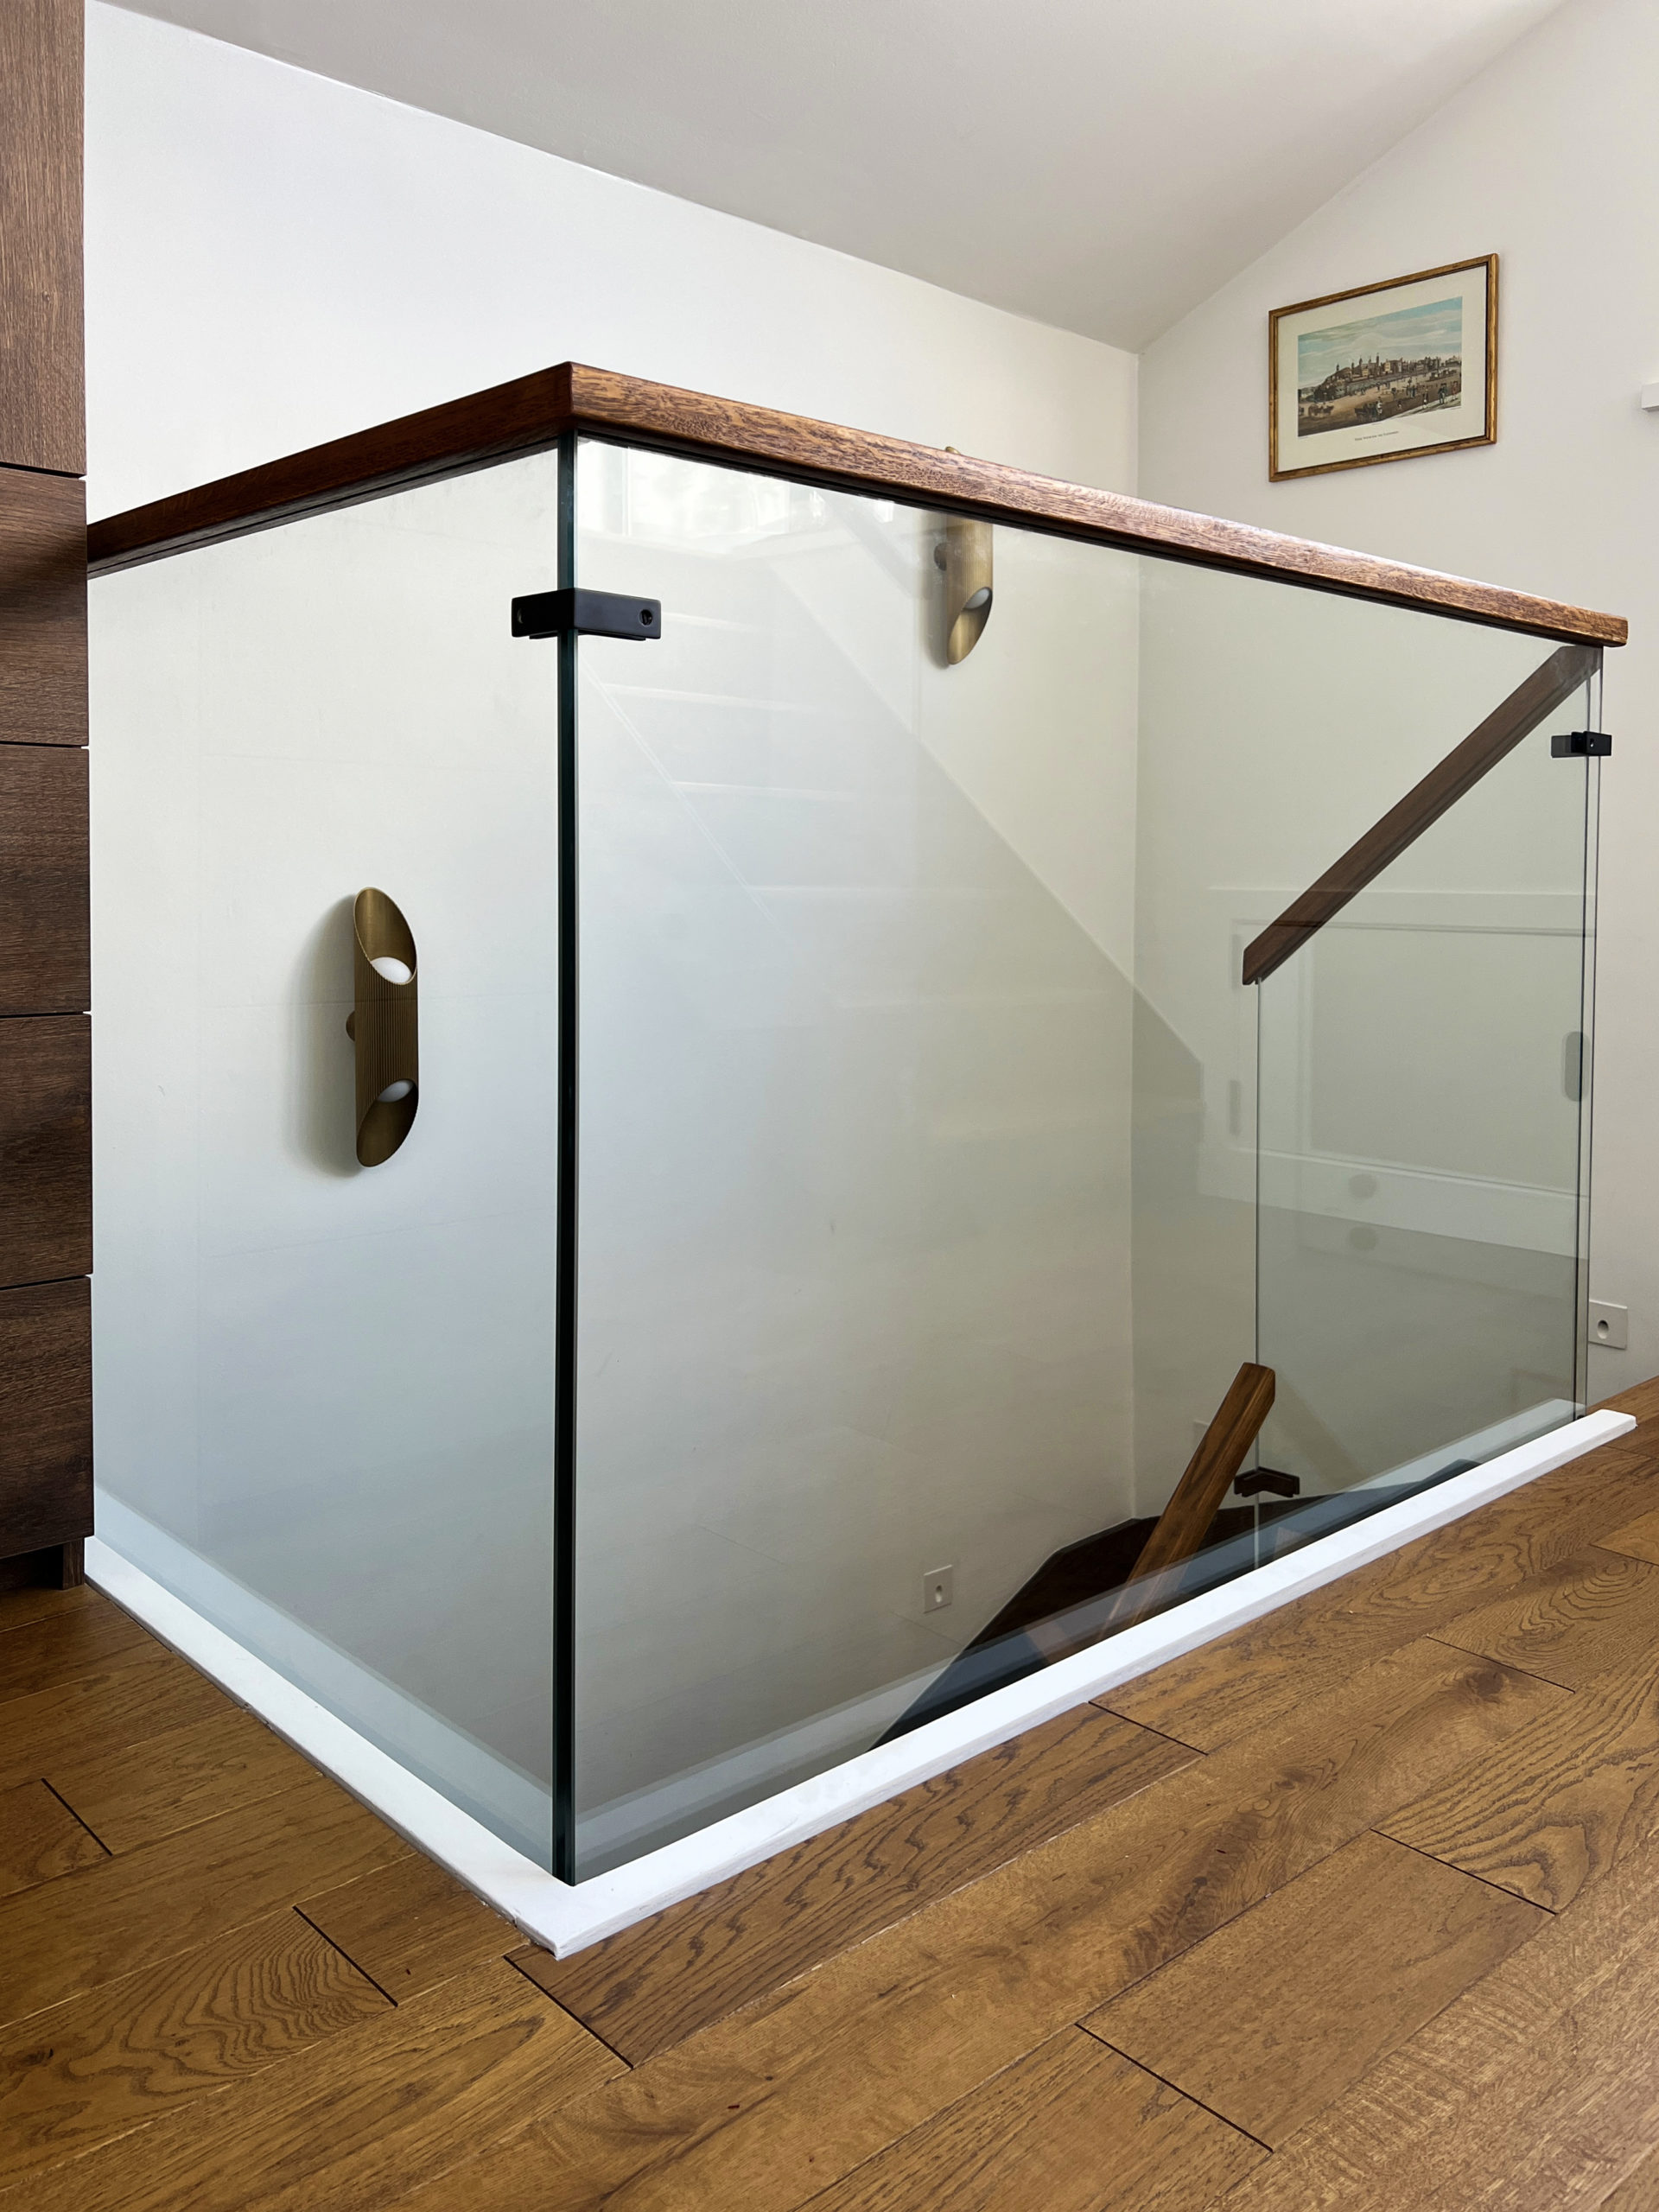 Glass balustrades with wooden handrail on top